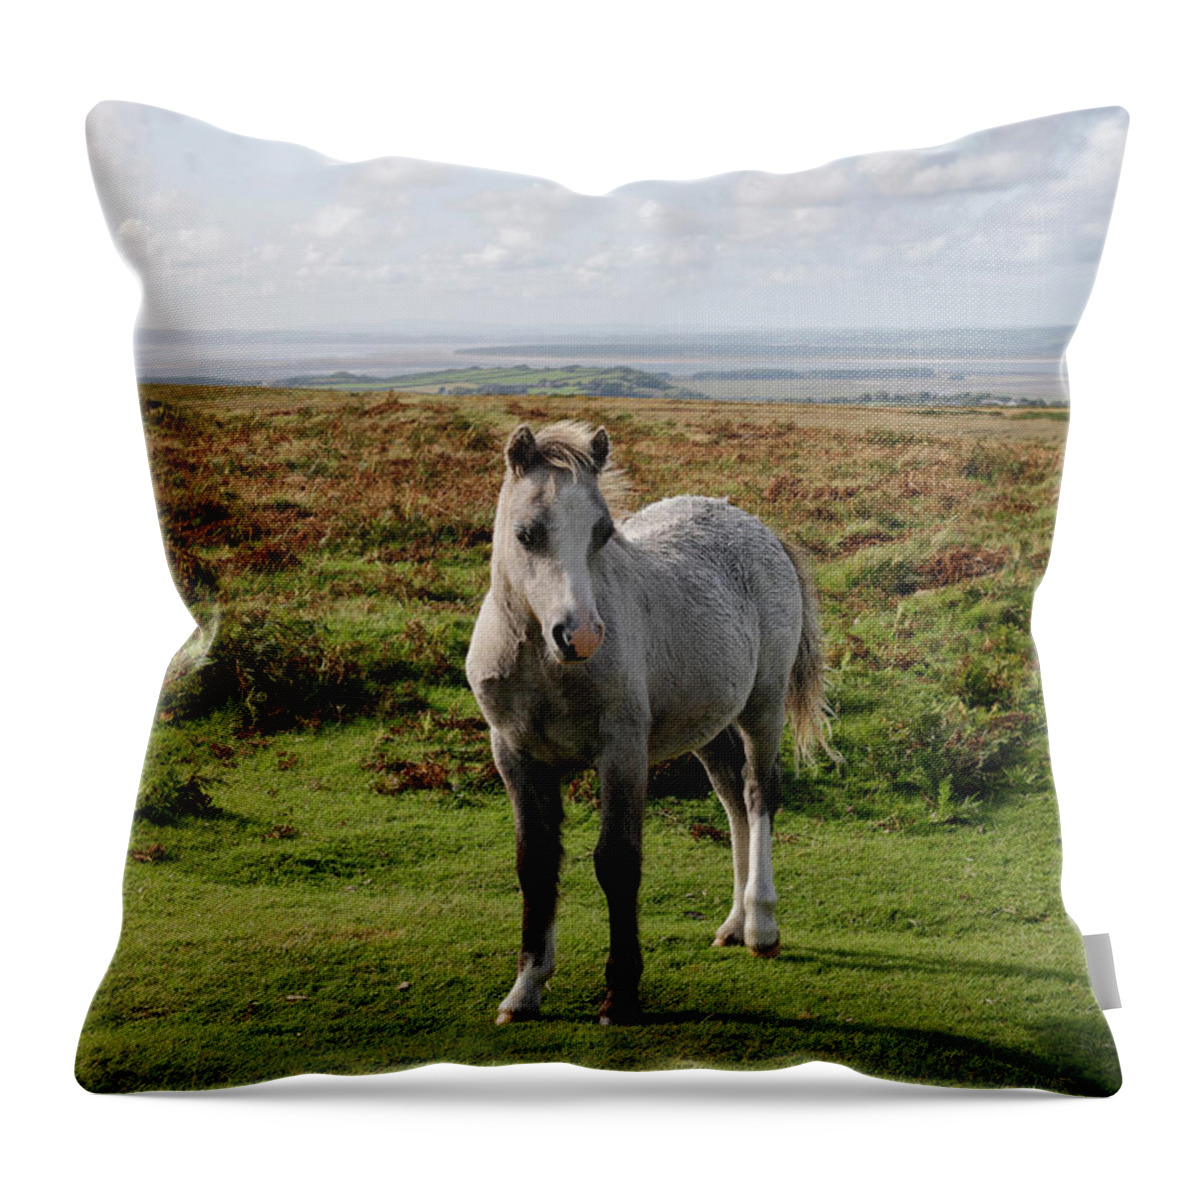 Wild Throw Pillow featuring the photograph Wild Horse Gower Peninsula by Kevin Round